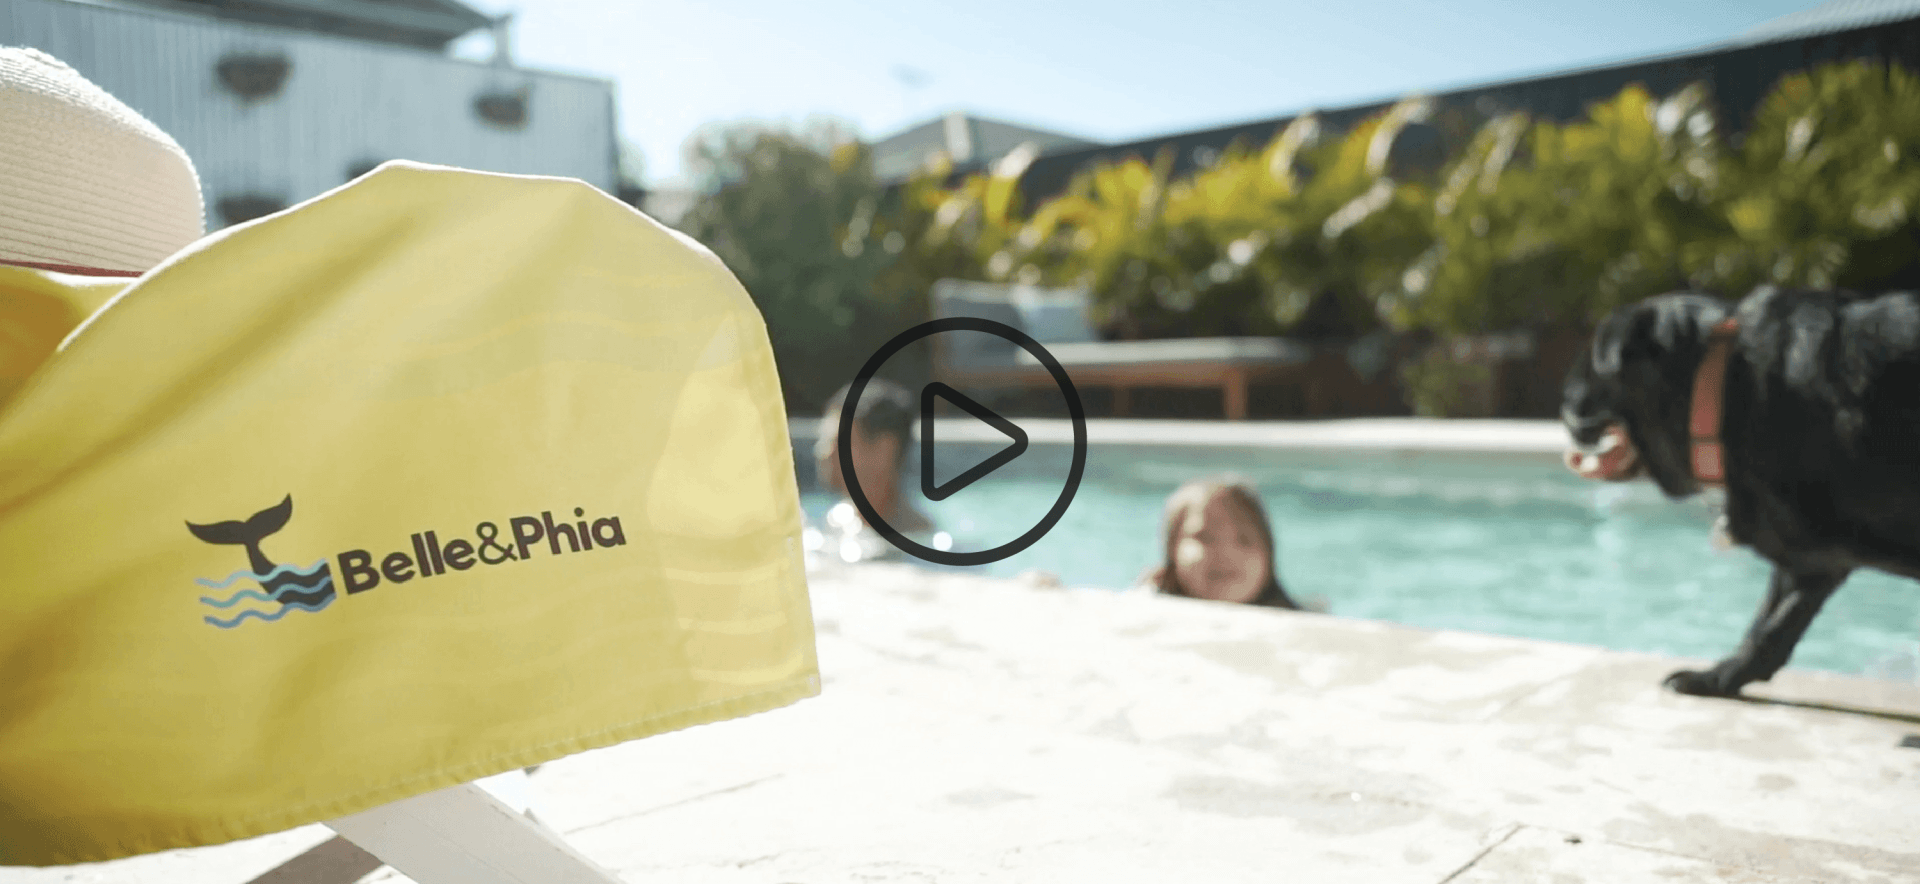 Belle & Phia Towels Promotional Product Video